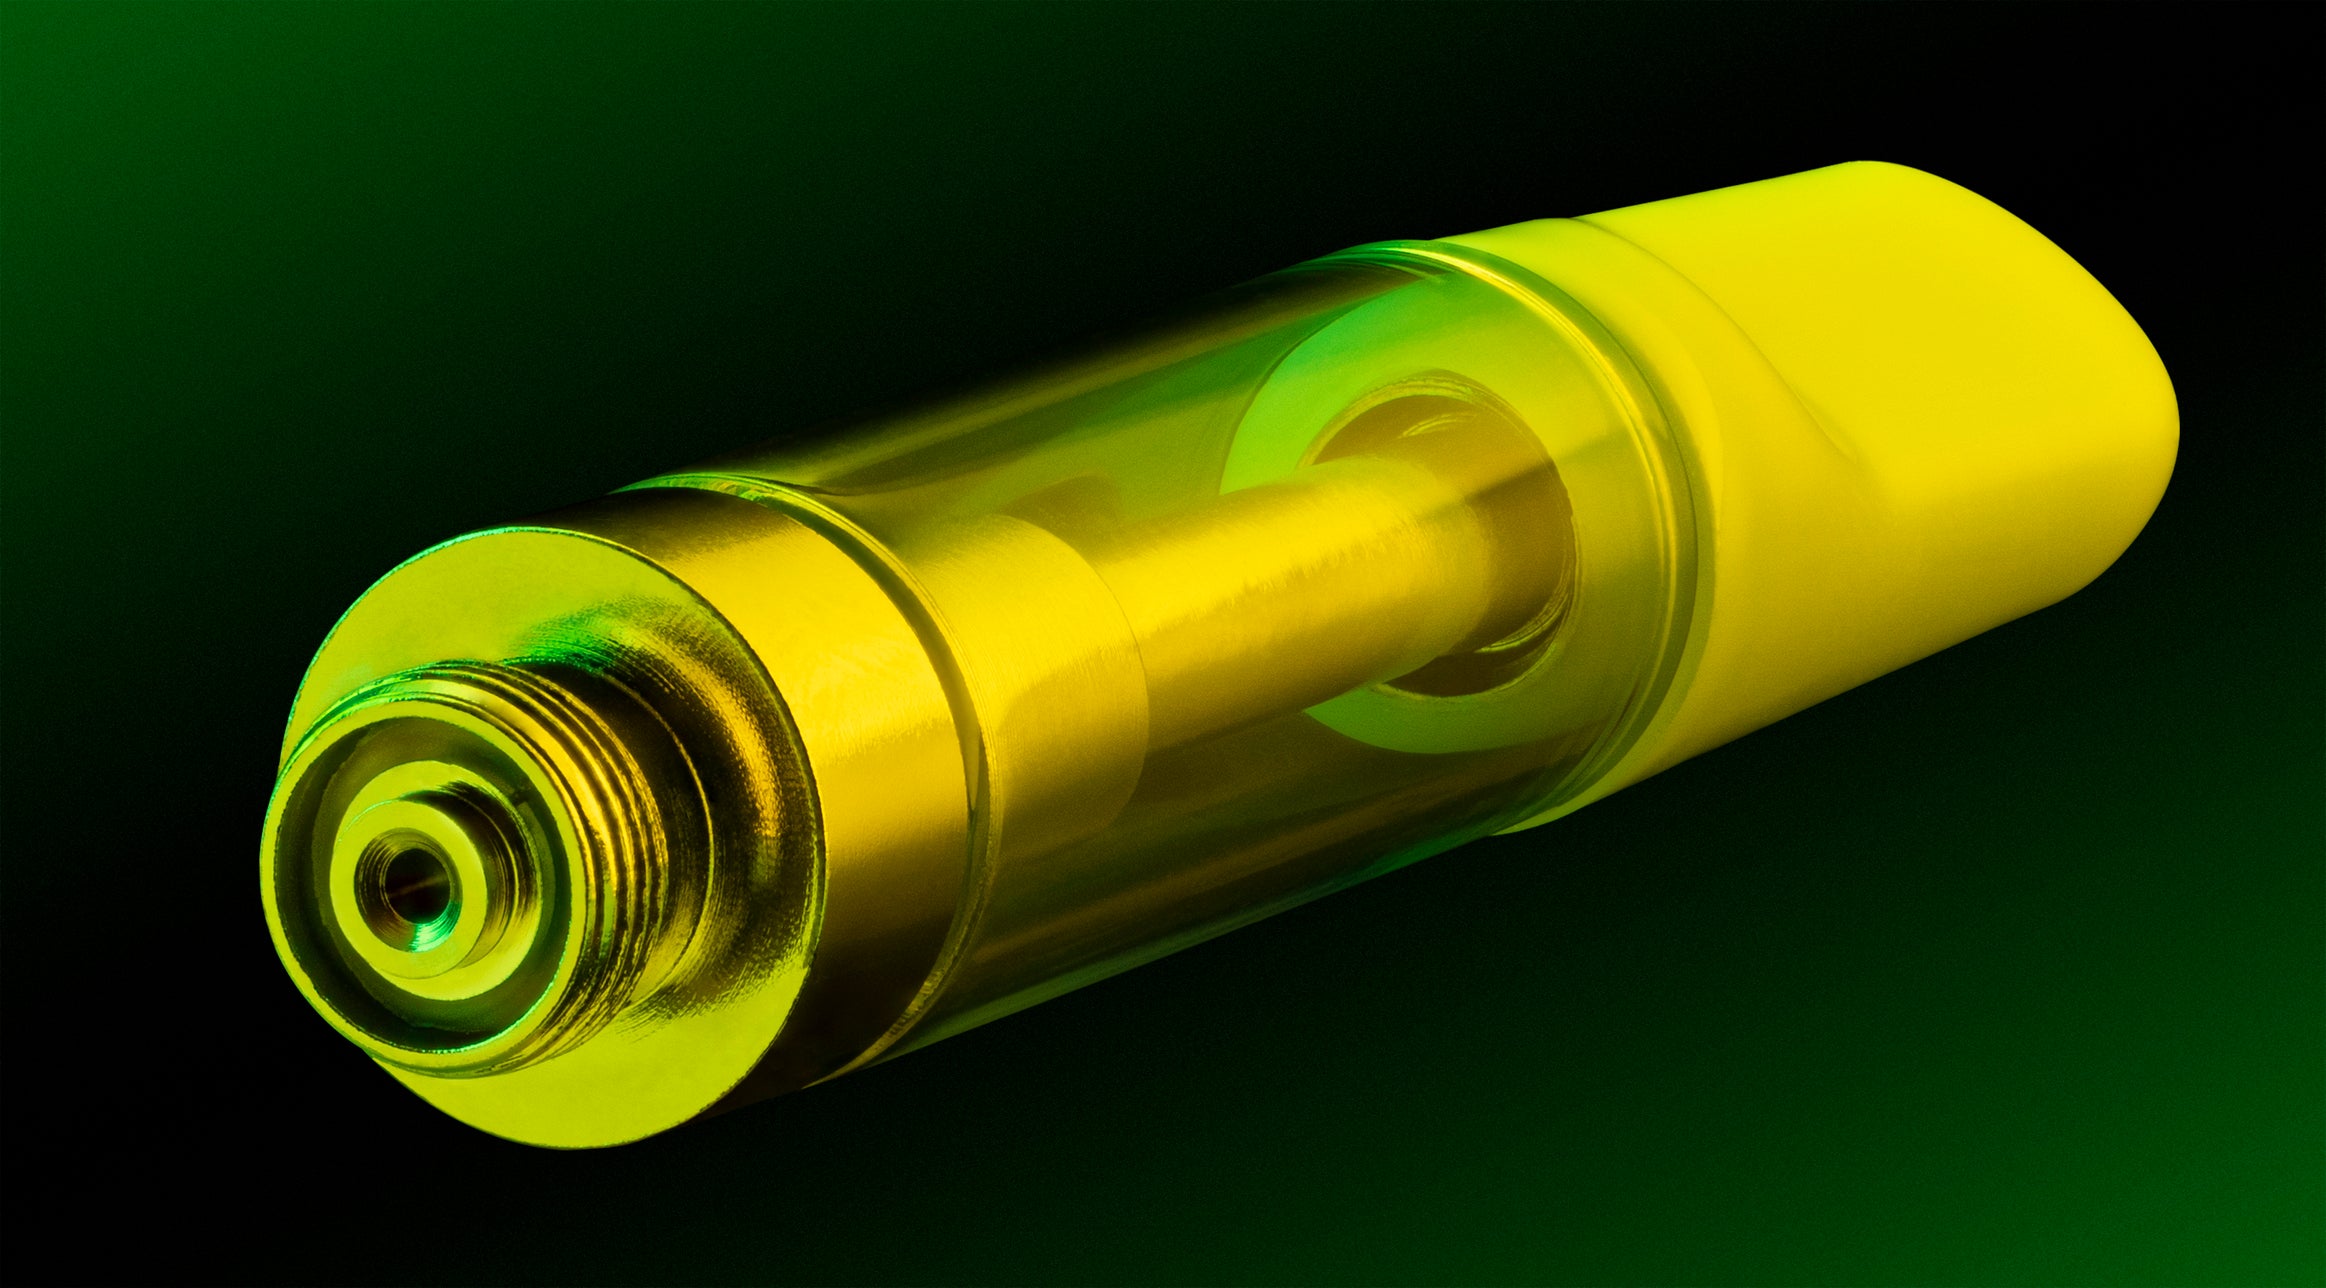 An empty weed vape cartridge in a neon green light lies against a black background.